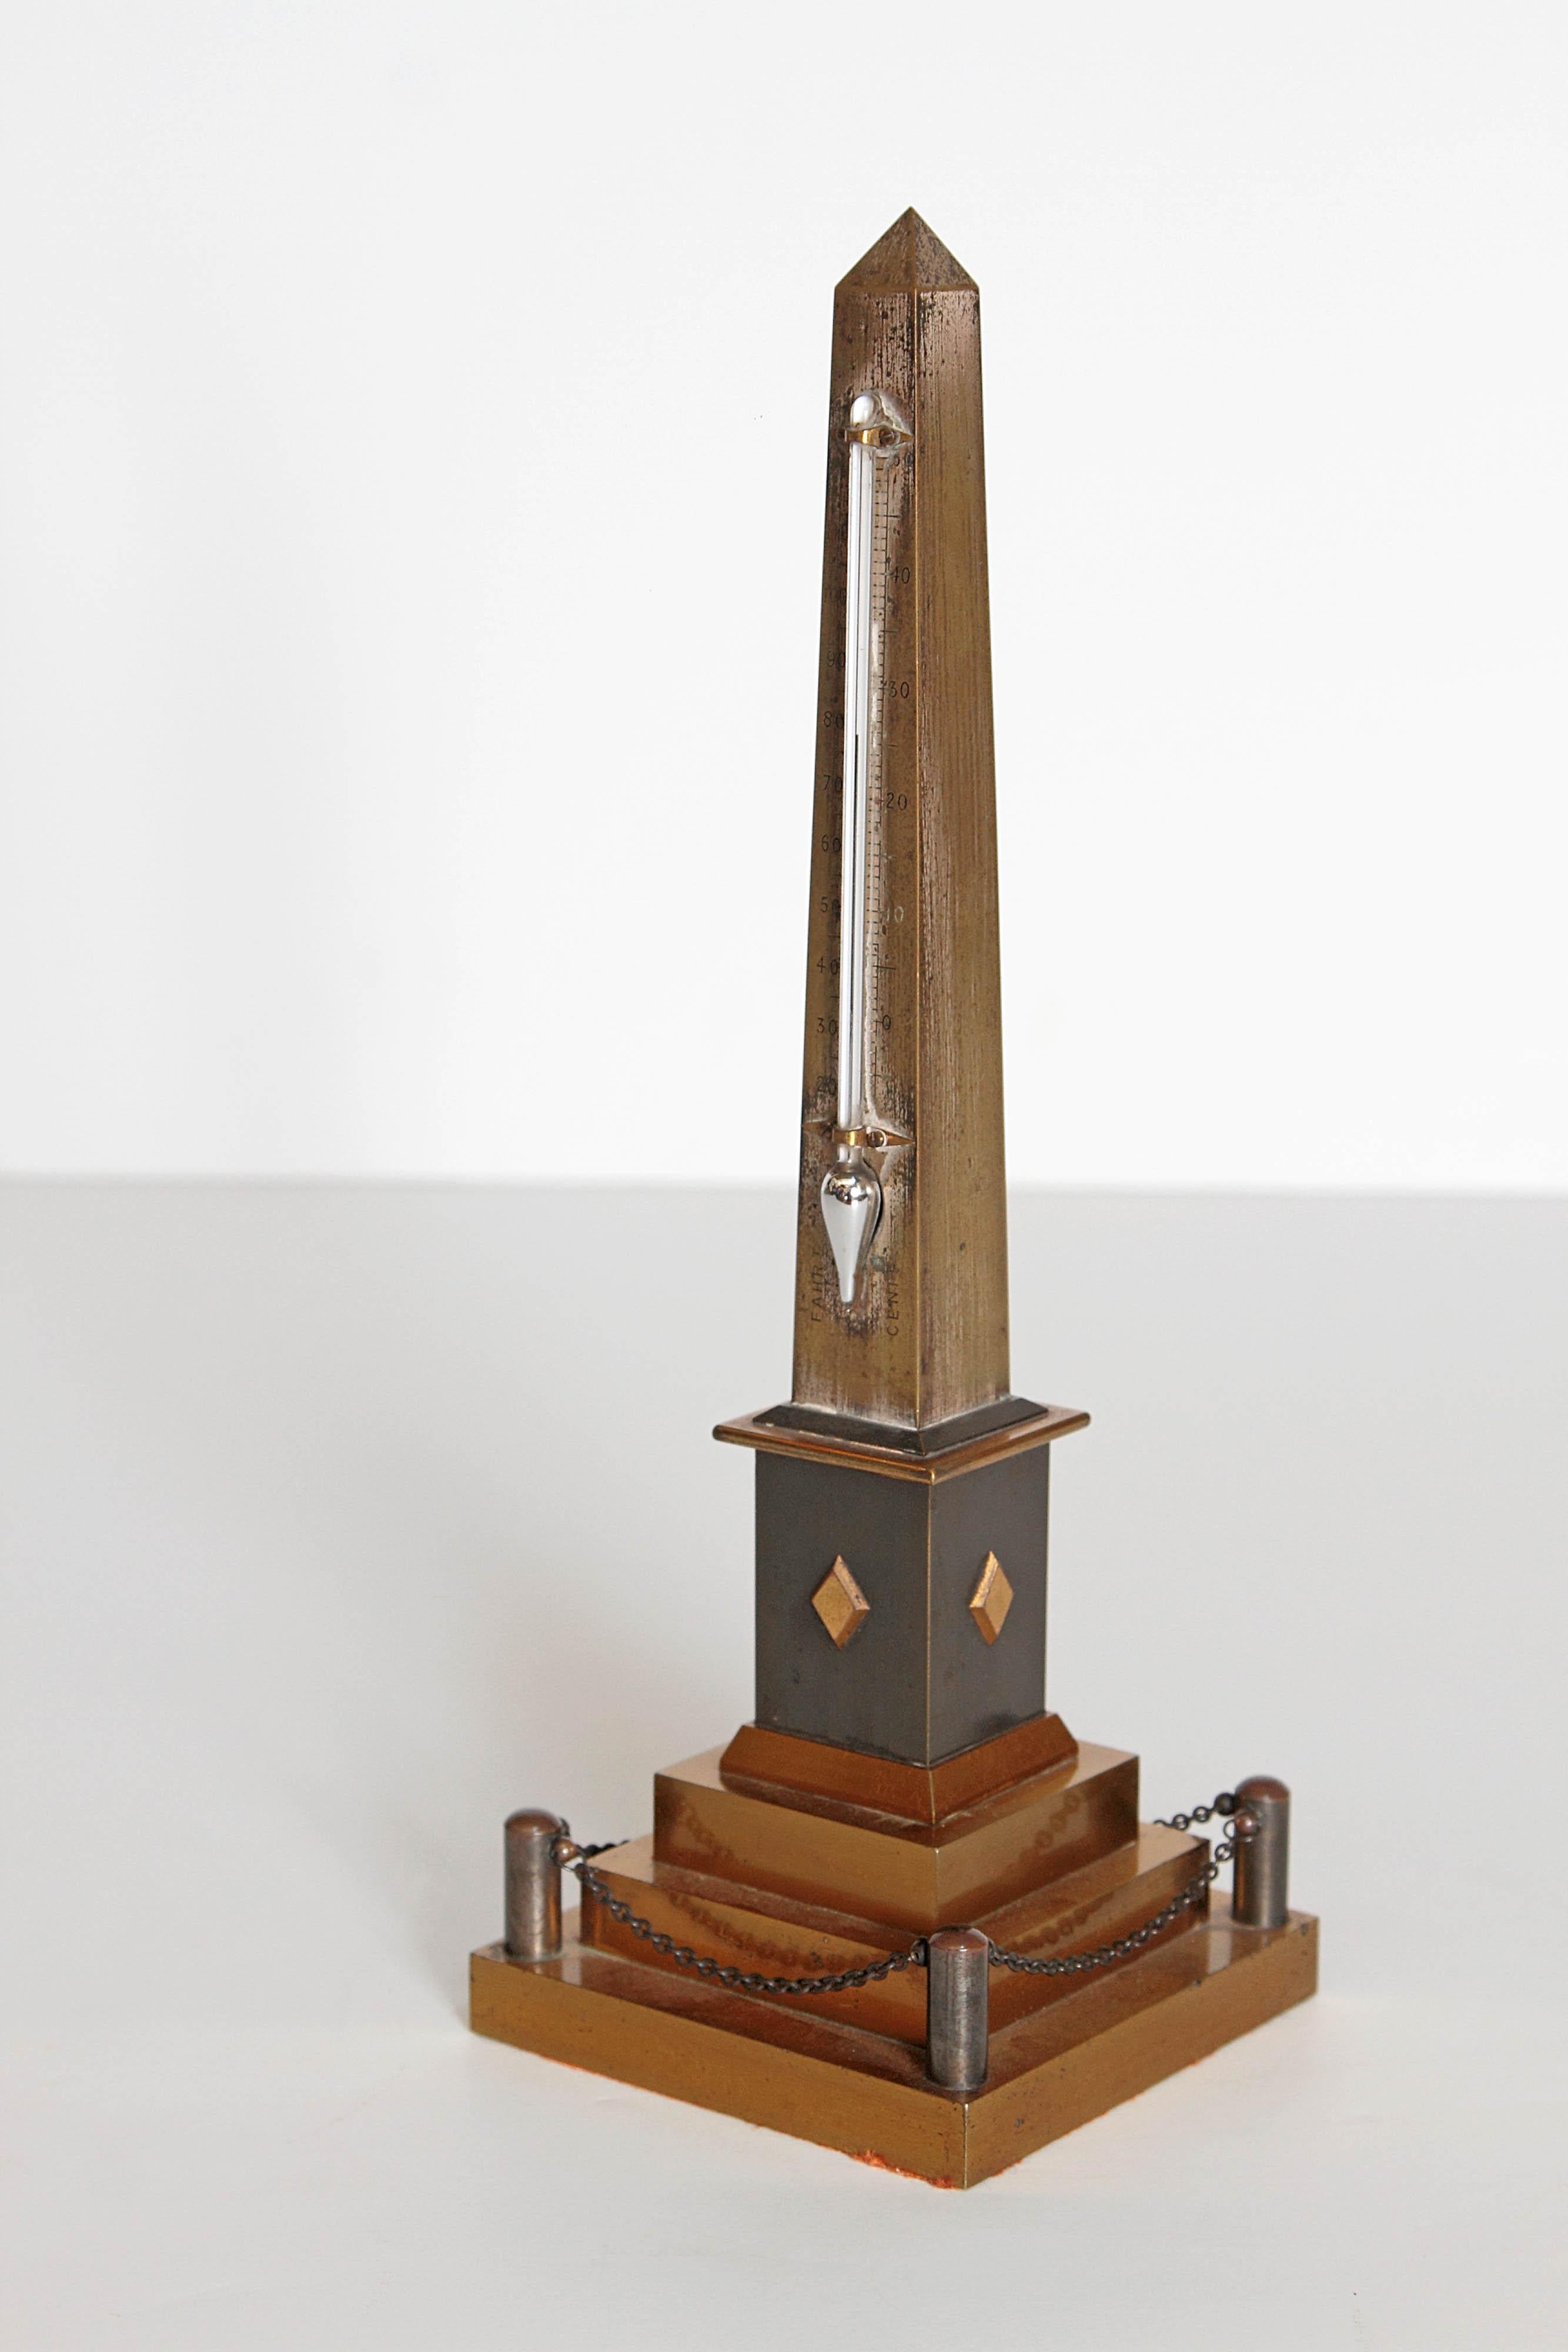 European Early 19th Century Continental Grand Tour Obelisk Thermometer